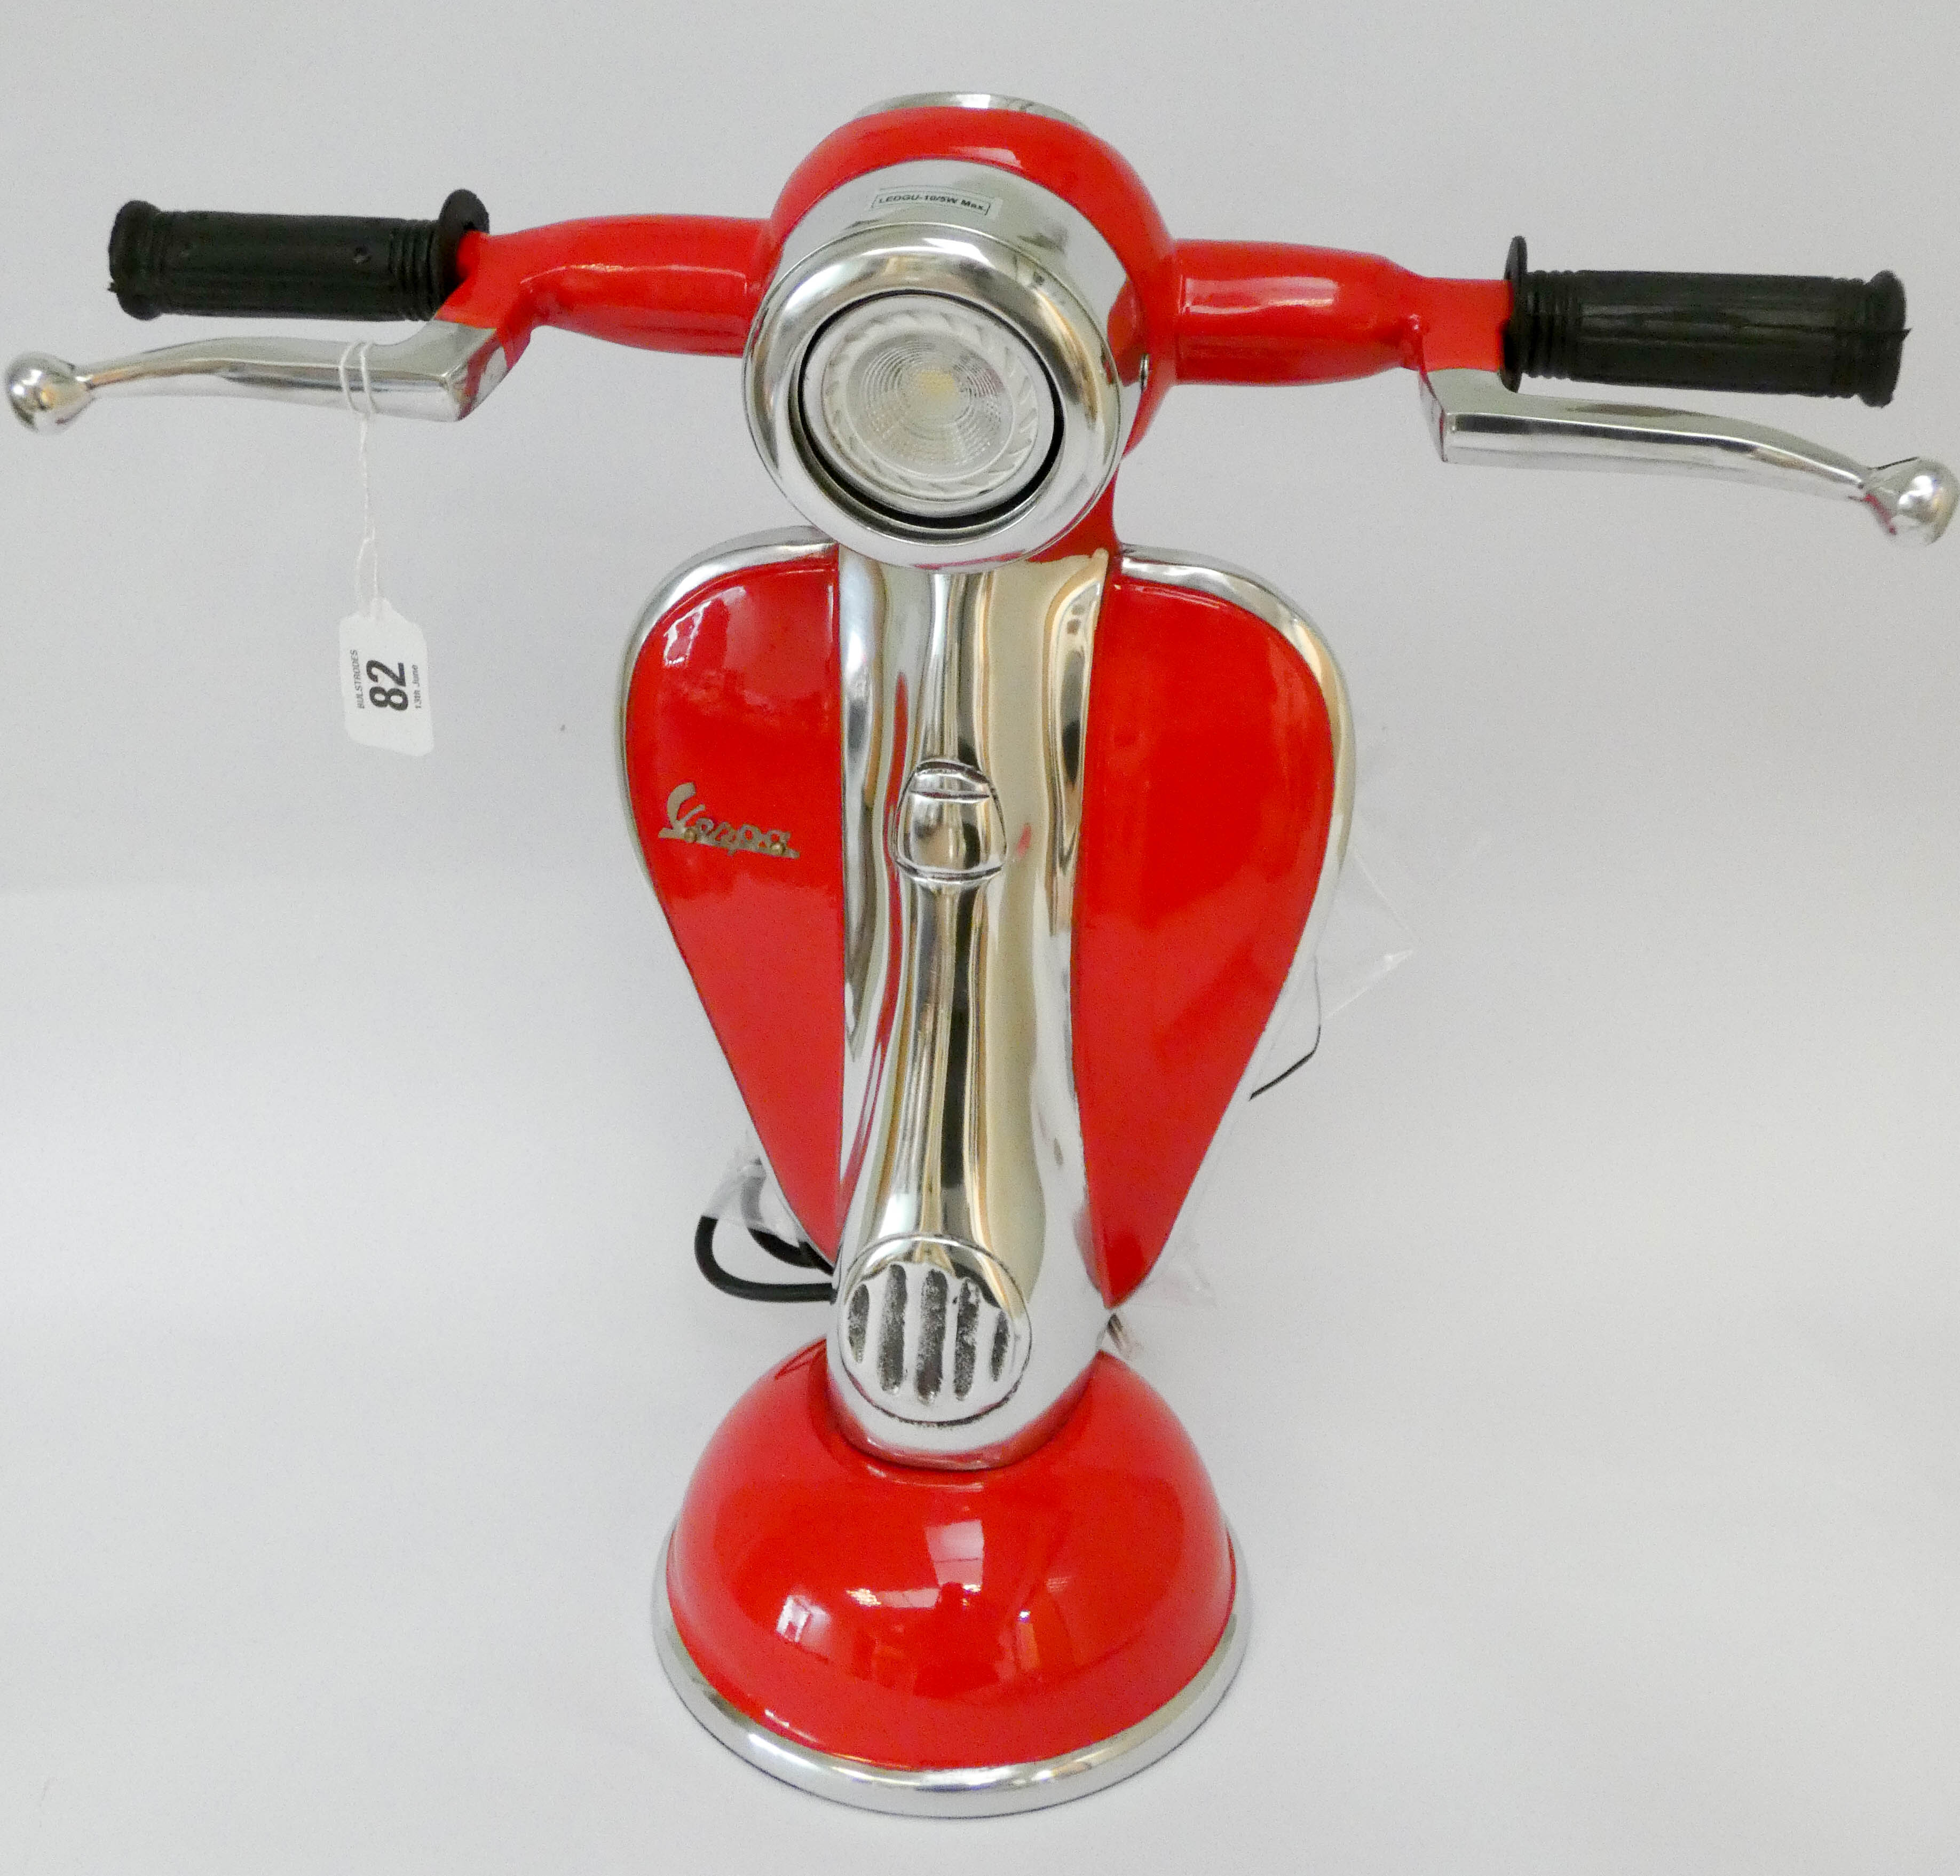 Vespa Scooter retro novelty red table lamp - modelled as the front fairing of a scooter